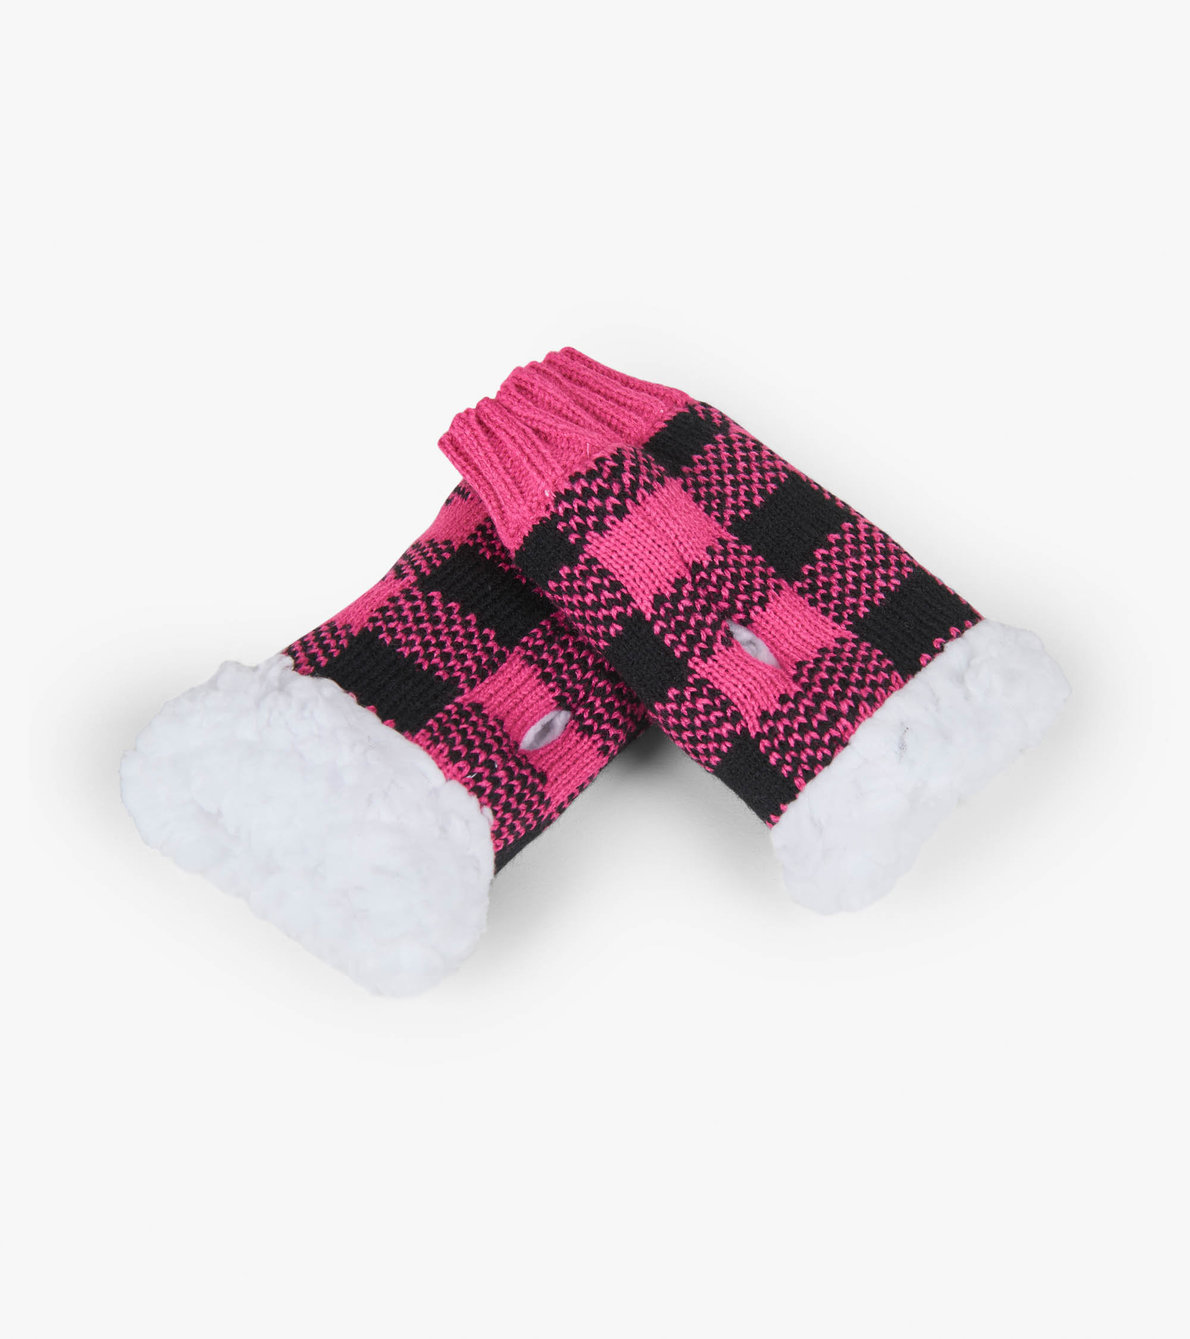 View larger image of Pink Plaid Texting Mittens